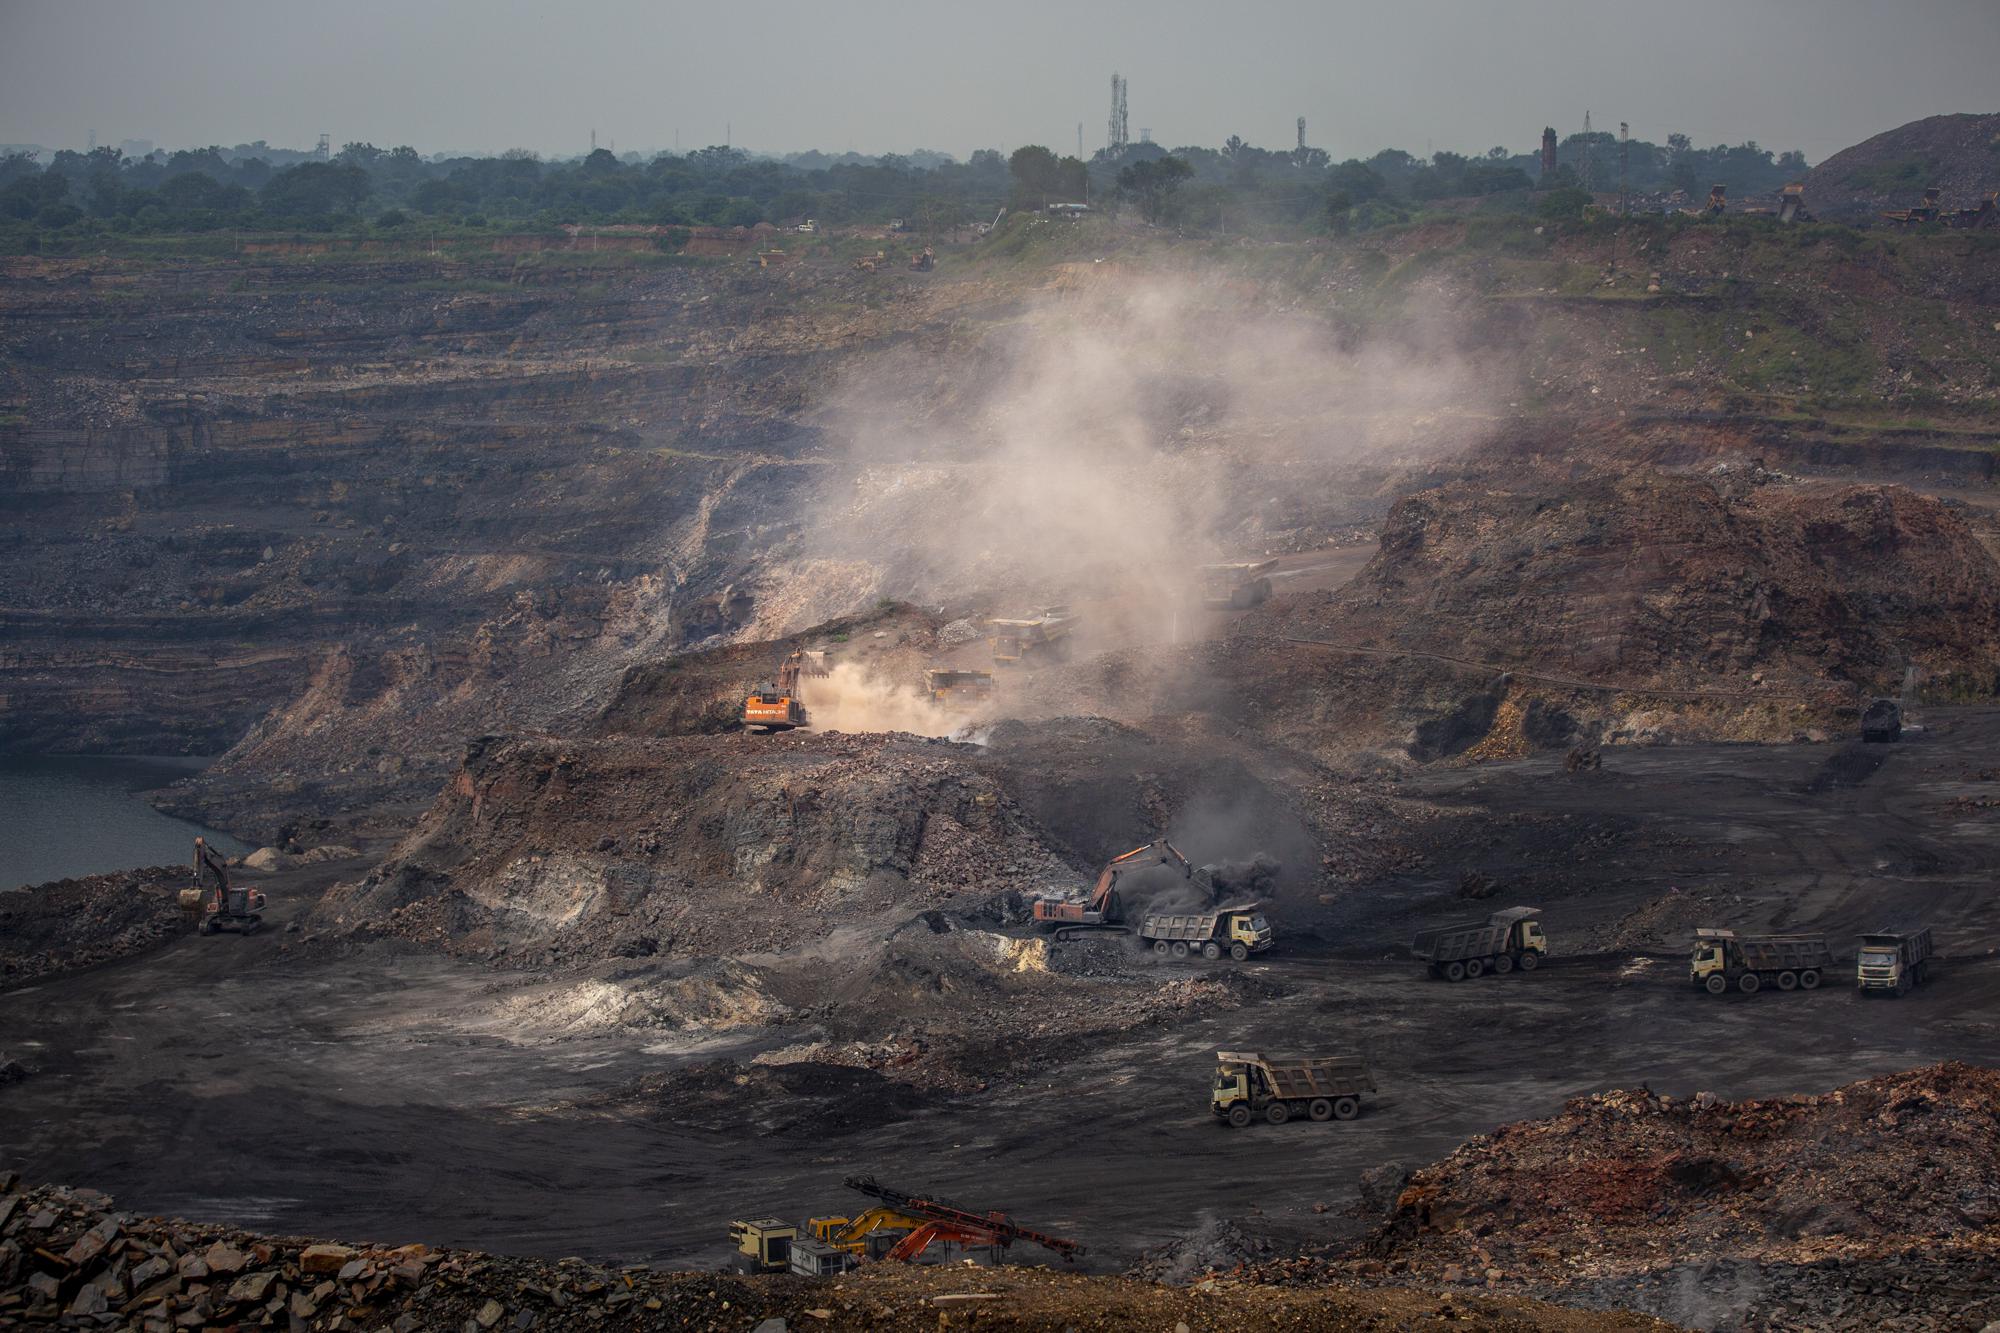 Mining is in progress at an open-cast mine near Dhanbad, an eastern Indian city in Jharkhand state, Friday, Sept. 24, 2021. Efforts to fight climate change are being held back in part because coal, the biggest single source of climate-changing gases, provides cheap electricity and supports millions of jobs. It's one of the dilemmas facing world leaders gathered in Glasgow, Scotland this week in an attempt to stave off the worst effects of climate change. (AP Photo/Altaf Qadri)